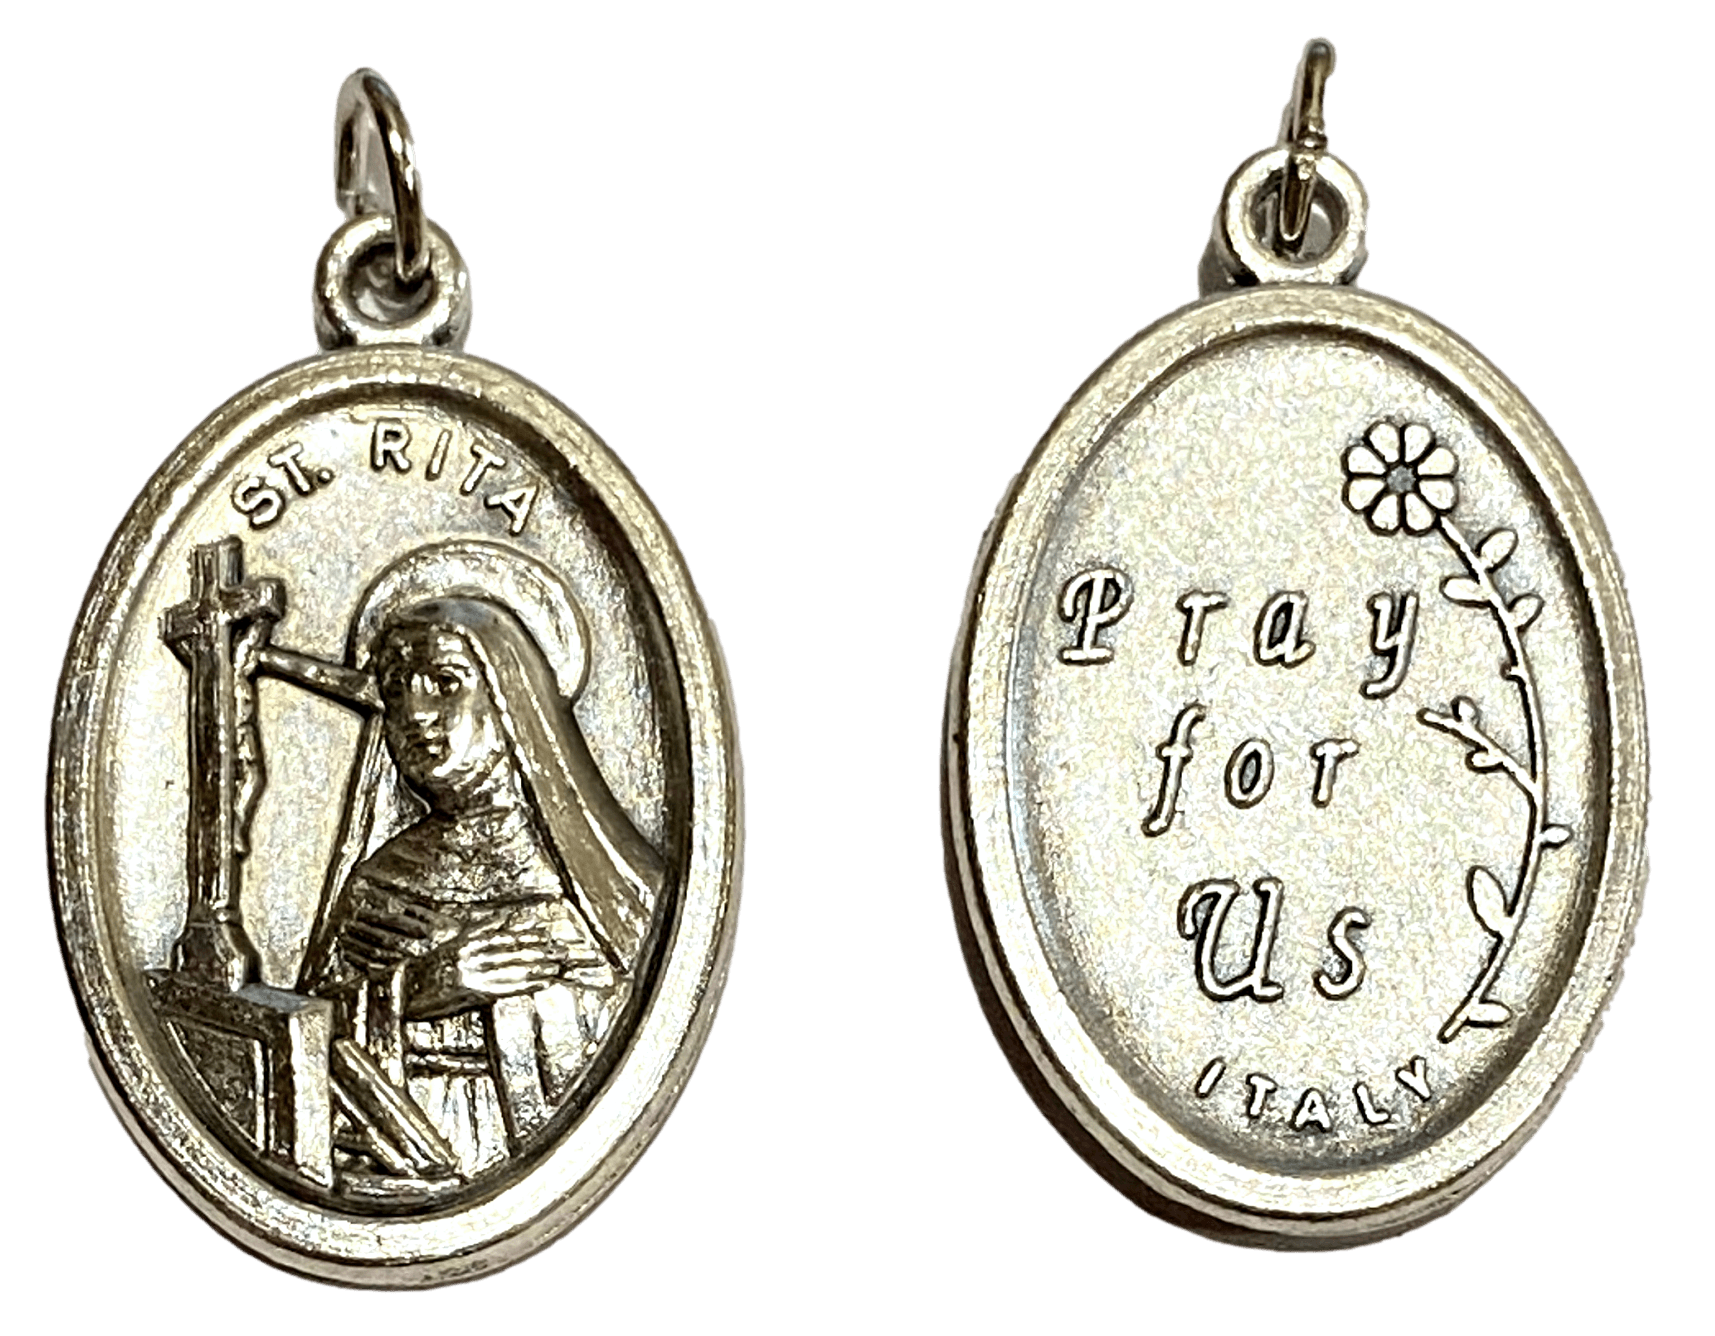 Medal Saint Rita Pray For Us Italian Double-Sided Silver Oxidized Metal Alloy 1 inch - Ysleta Mission Gift Shop- VOTED El Paso's Best Gift Shop